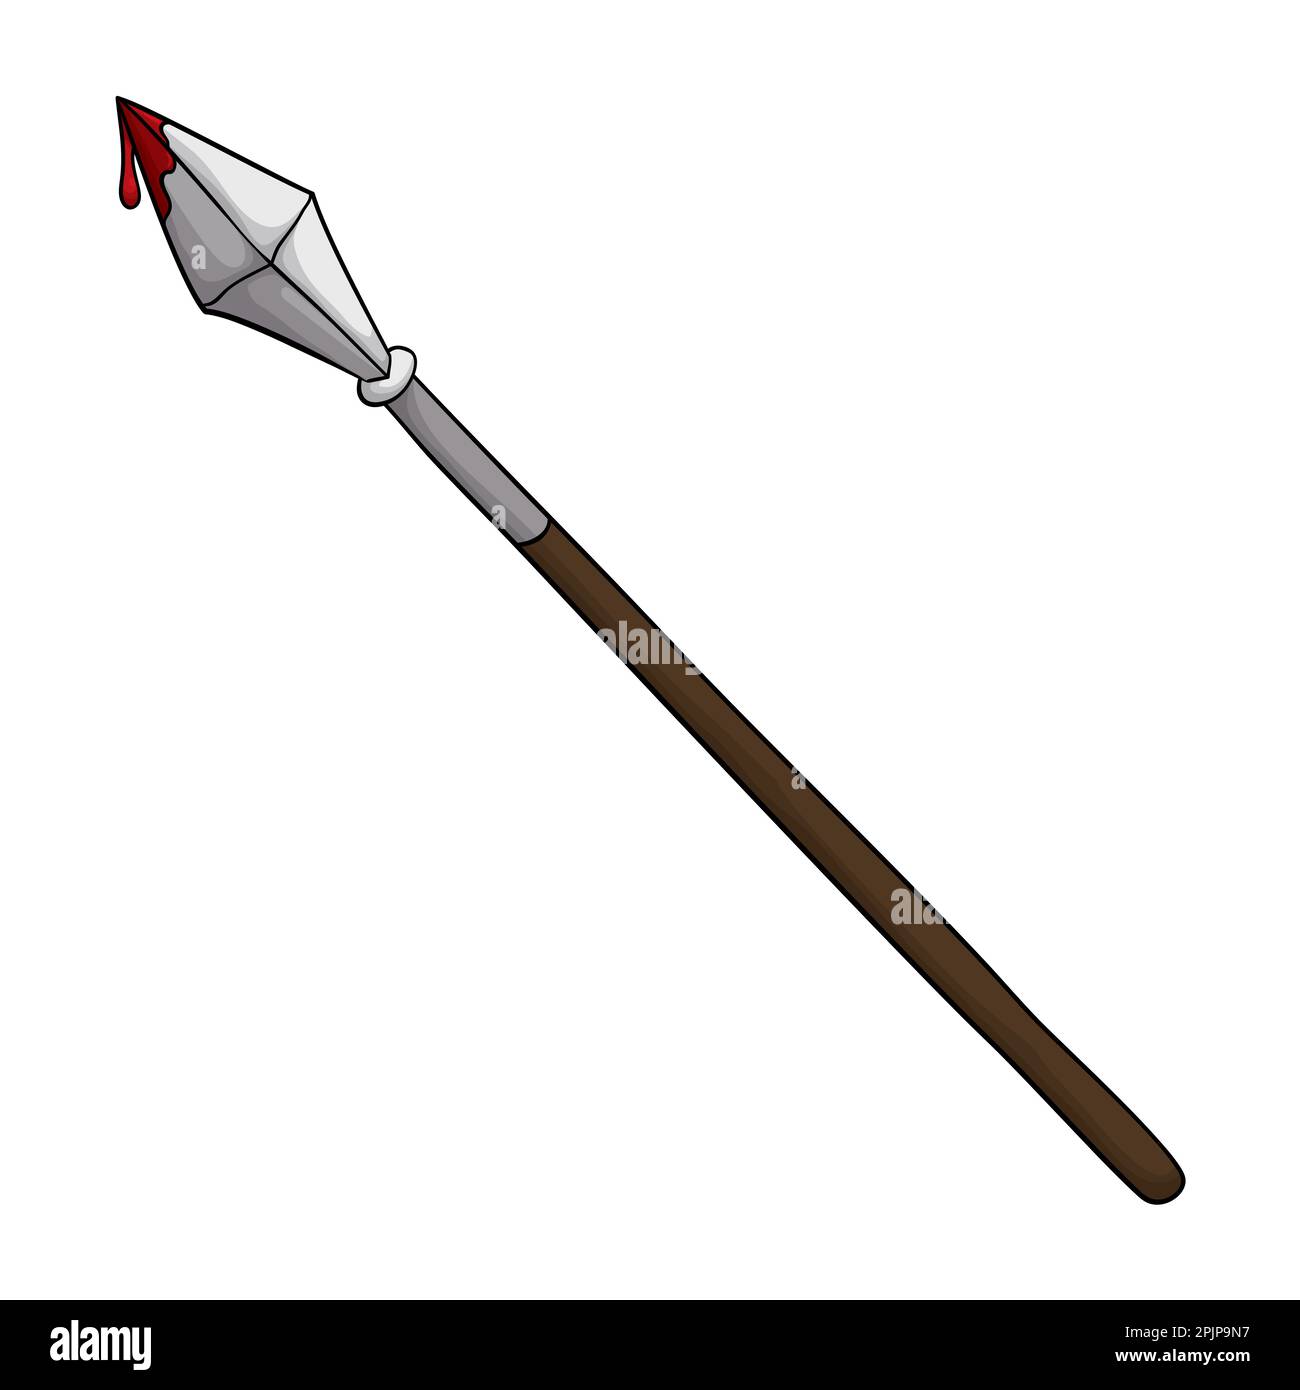 Spear of Longinus used during the crucifixion of Jesus to pierce his side, with some blood. Cartoon style design on white background. Stock Vector